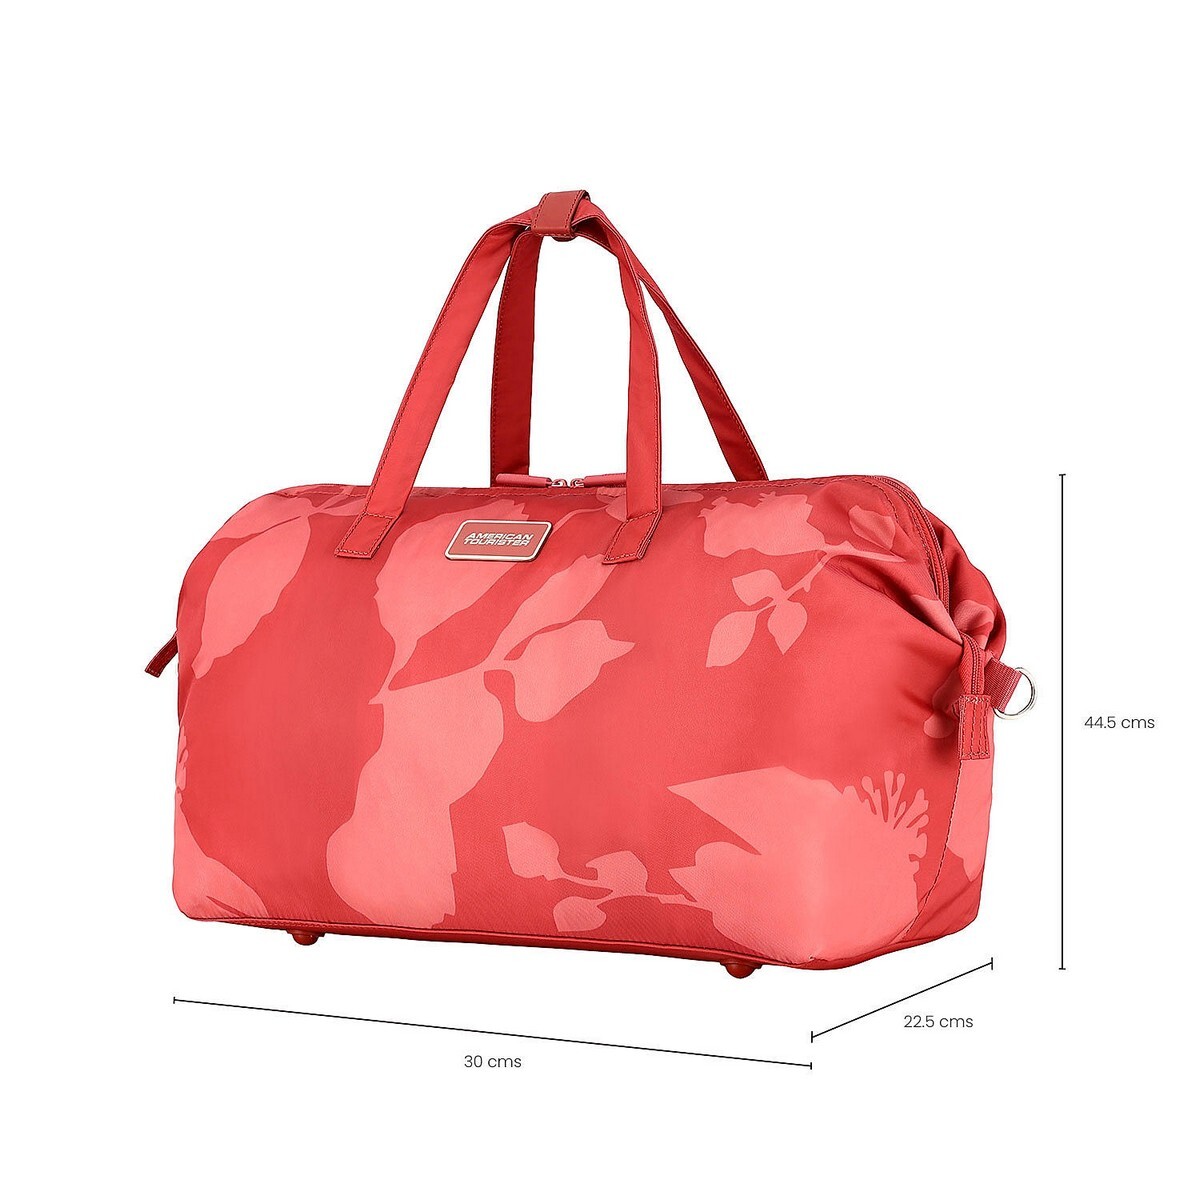 American Tourister Duffle Bag Bloom 45cm 01 Red